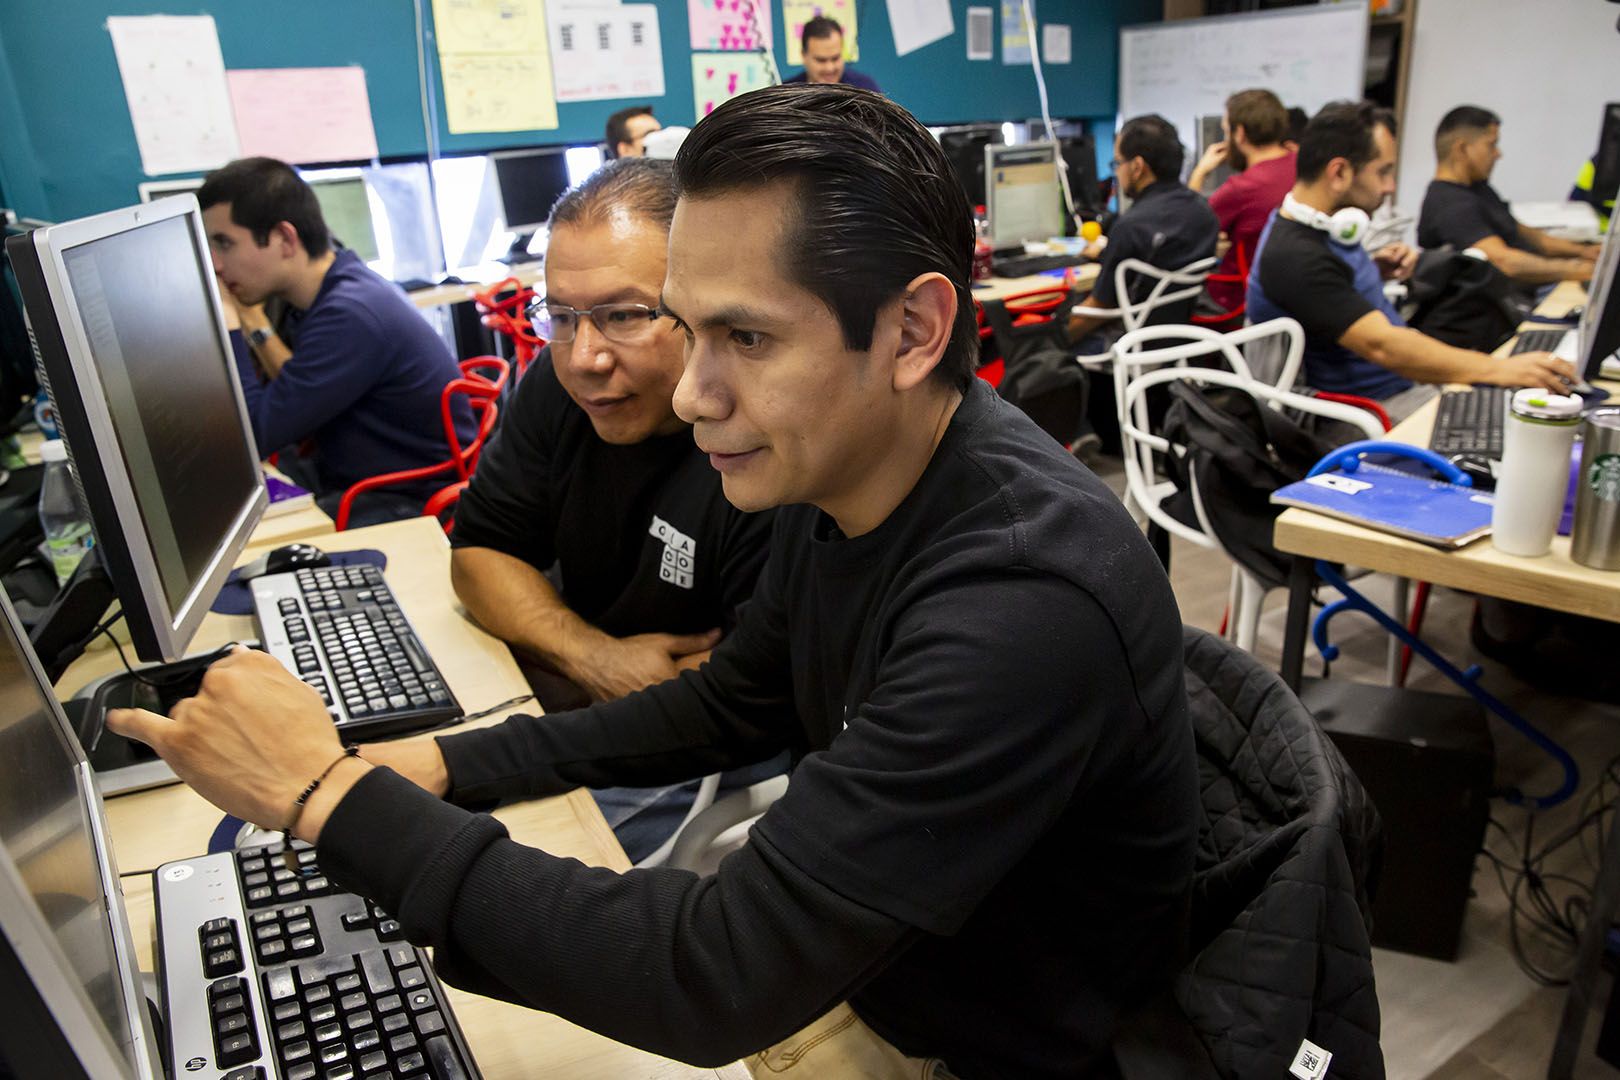 Orlando Mendoza works during classes of Hola Code, a nonprofit that offers training in software development for returnees and deportees in Mexico. Mendoza recently graduated from the program and secured a job. He grew up in Yakima and the Seattle area. Image by Erika Schultz. Mexico, 2019.